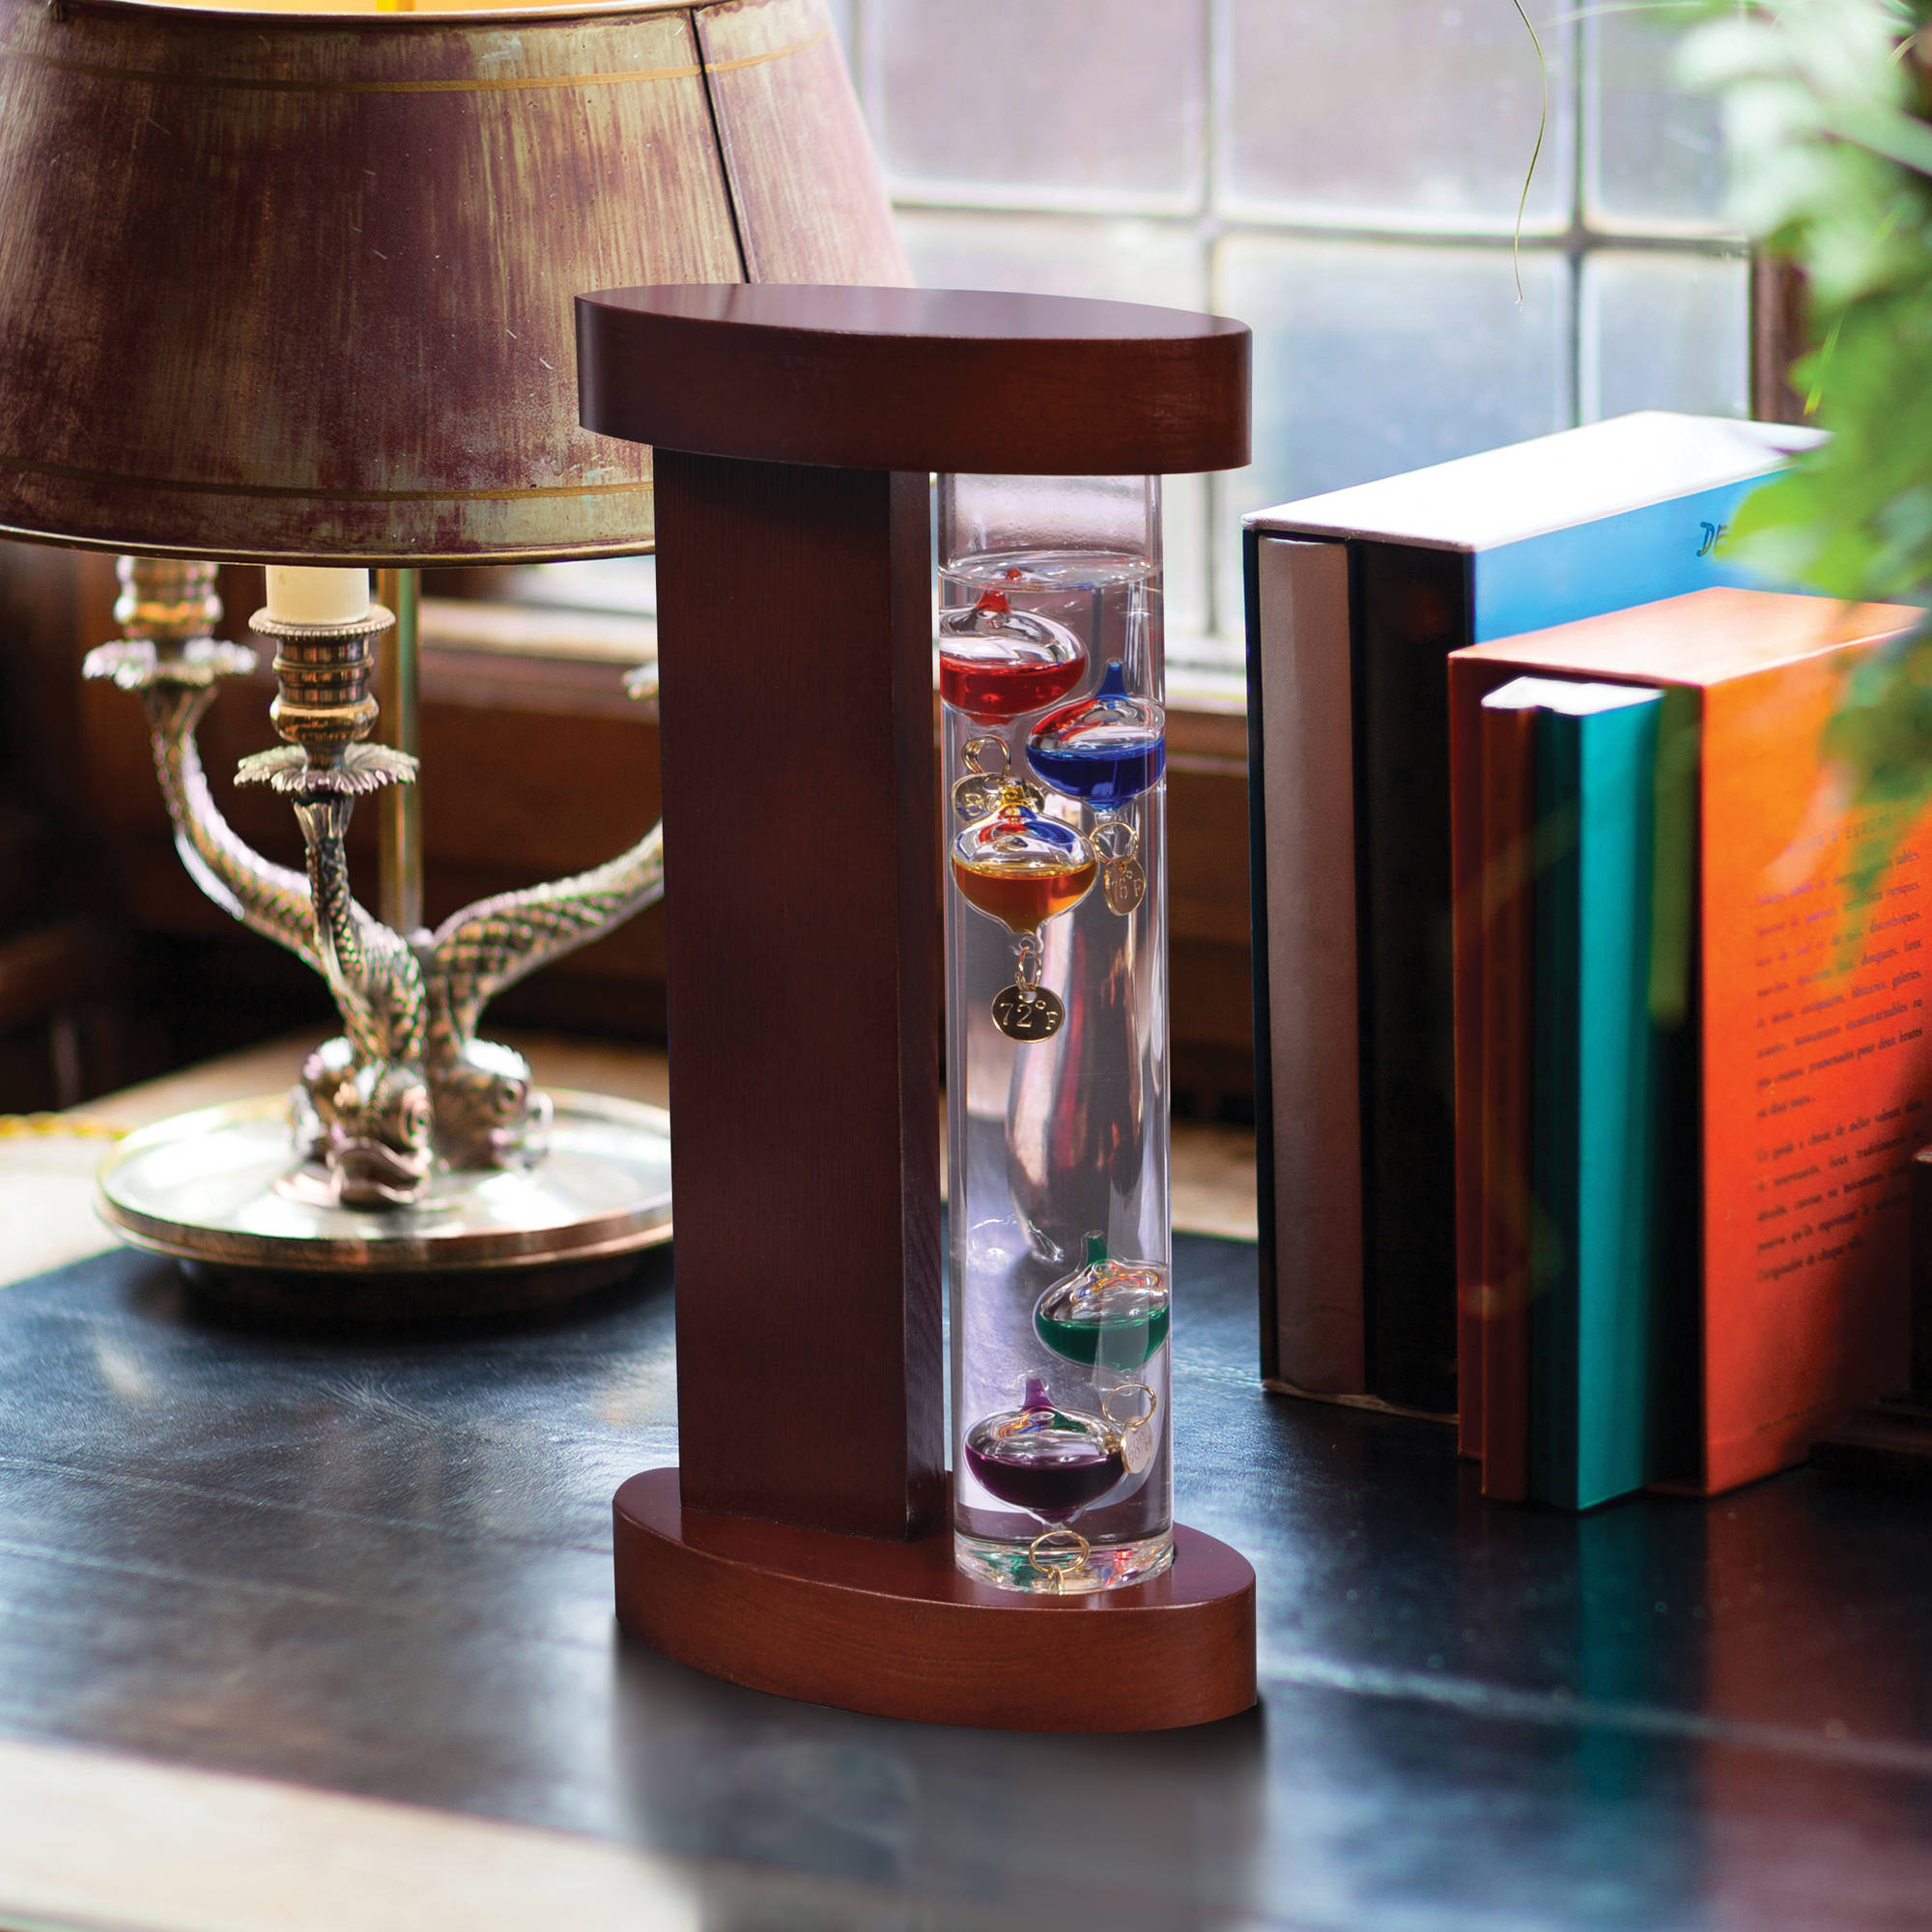 Galileo Thermometer with Wood Stand - image 2 of 2